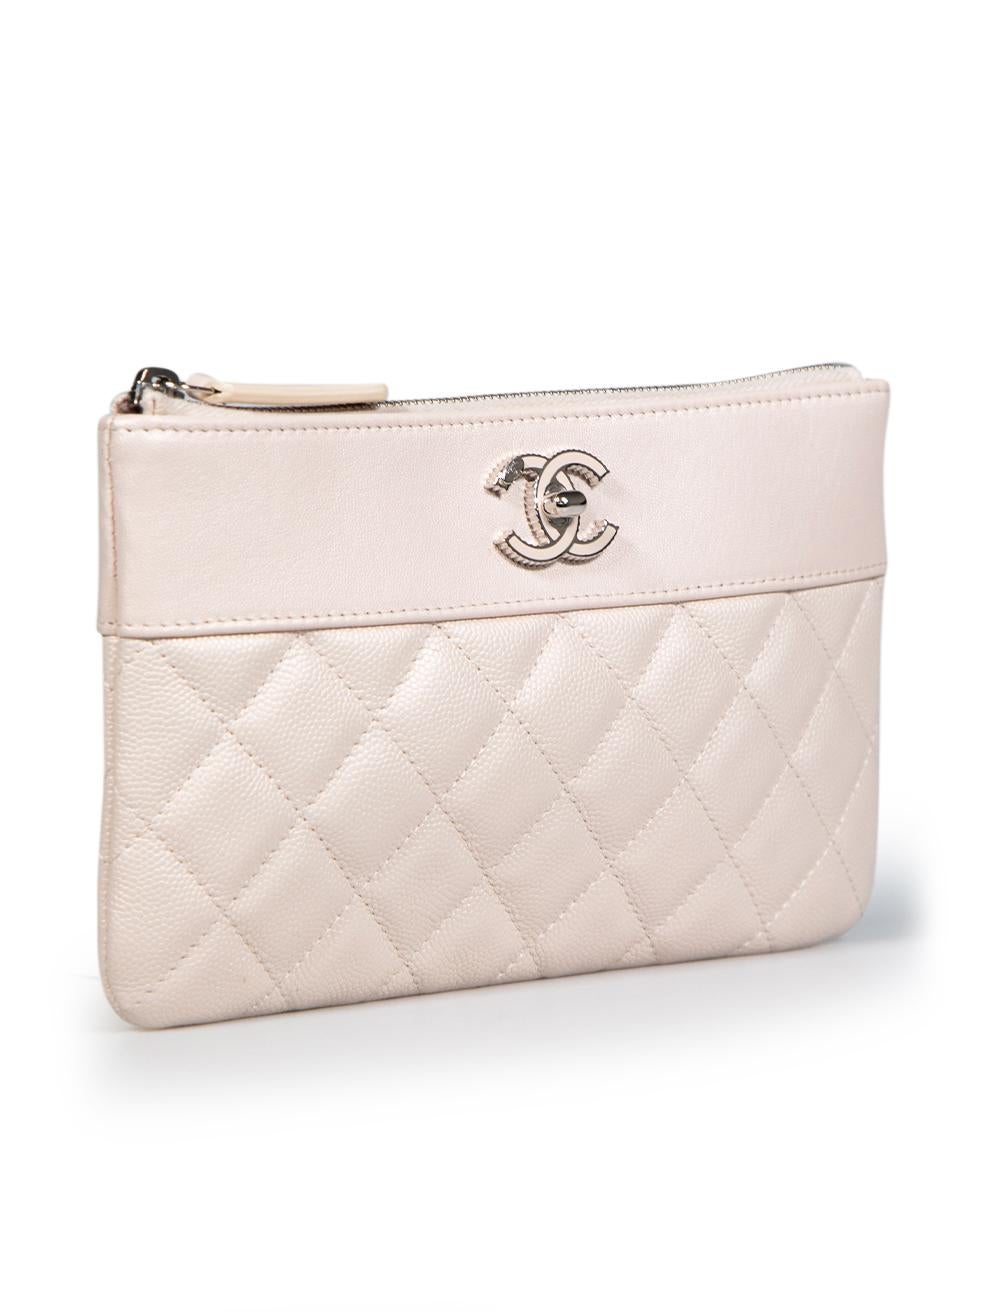 CONDITION is Very good. Minimal wear to the clutch is evident. Minimal marks to the back and small scratches to the right top corner. Indent to the back top of the clutch on this used Chanel designer resale item. This item comes with an original